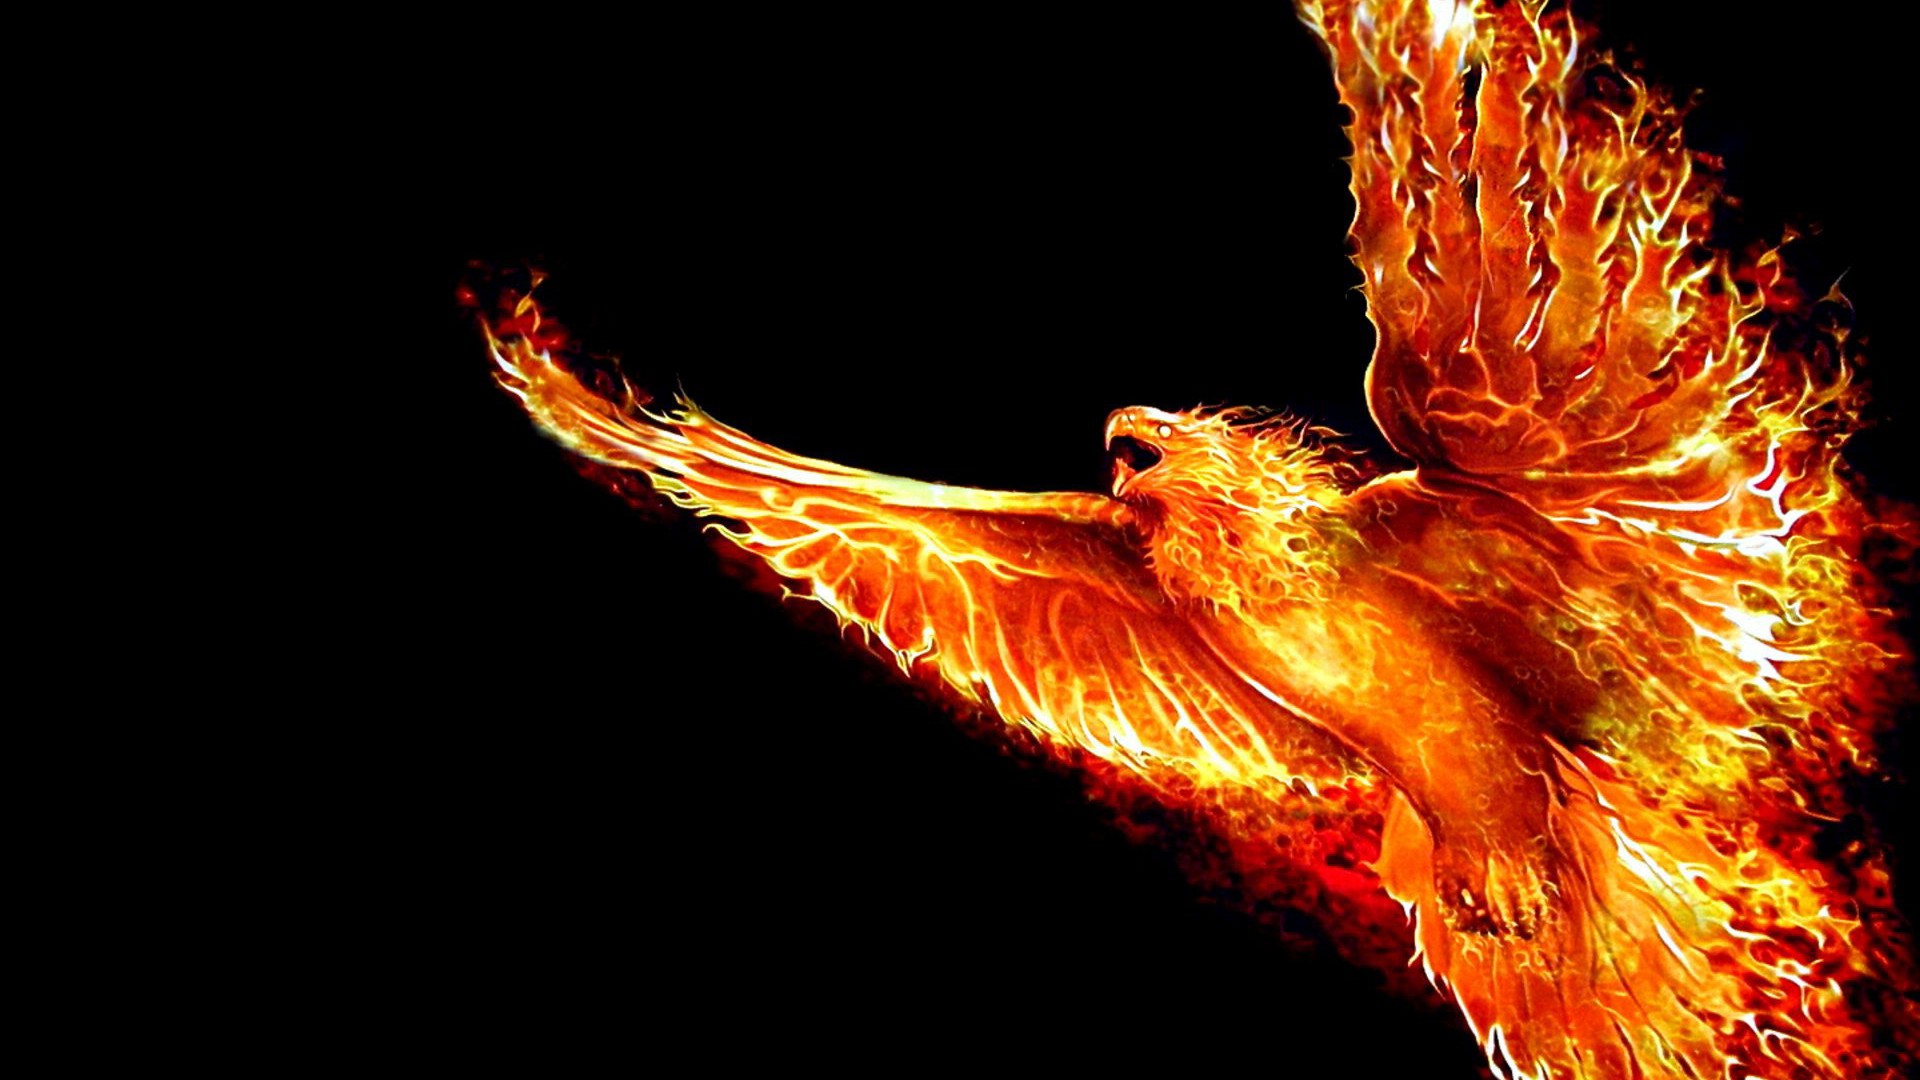 Dark Phoenix Desktop Backgrounds with image resolution 1920x1080 pixel. You can make this wallpaper for your Desktop Computer Backgrounds, Mac Wallpapers, Android Lock screen or iPhone Screensavers